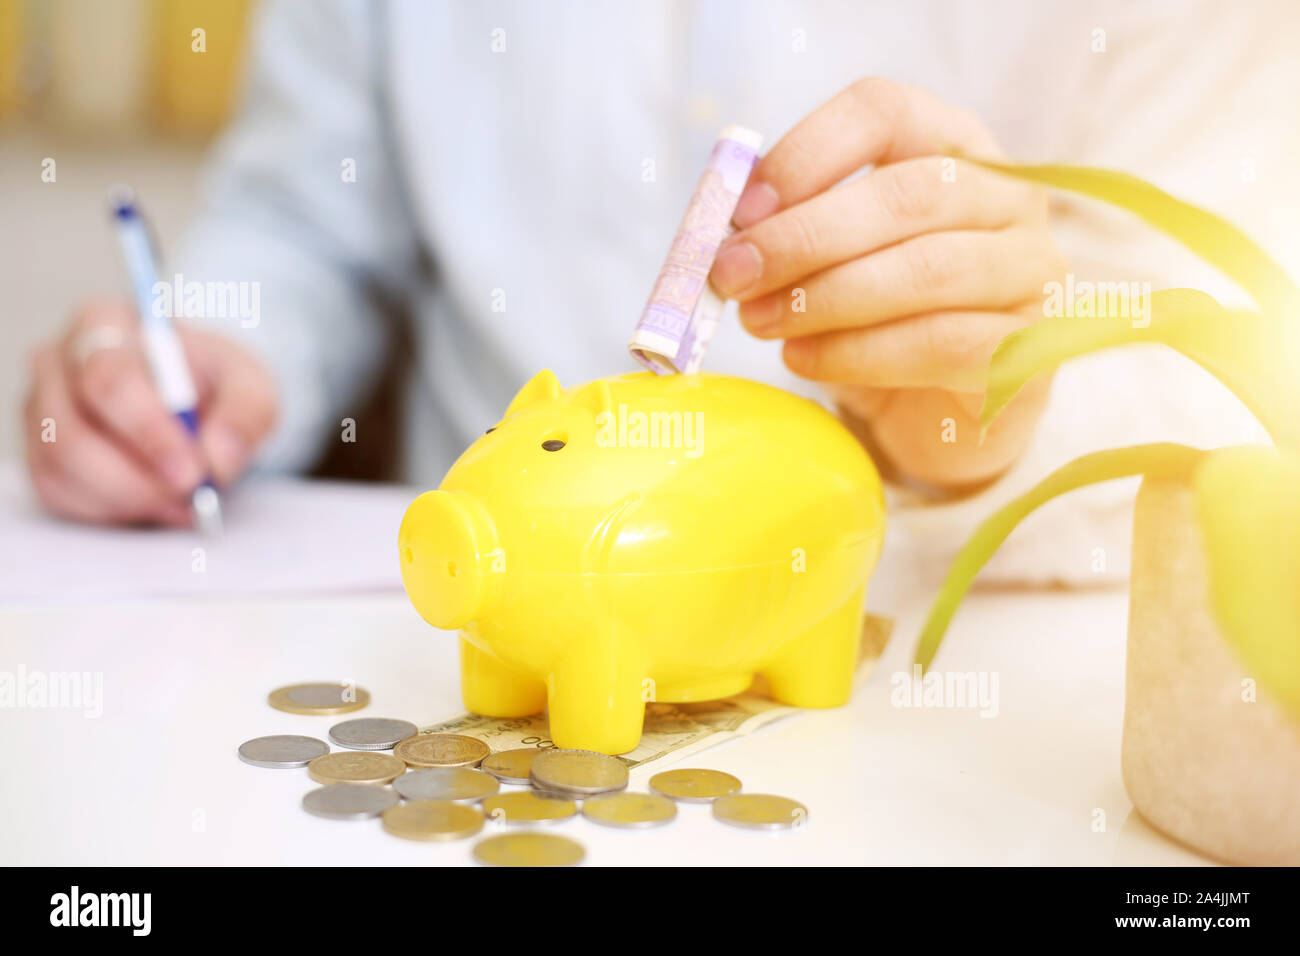 Picture of person depositing money in a yellow piggy bank. Isolated on background. Stock Photo